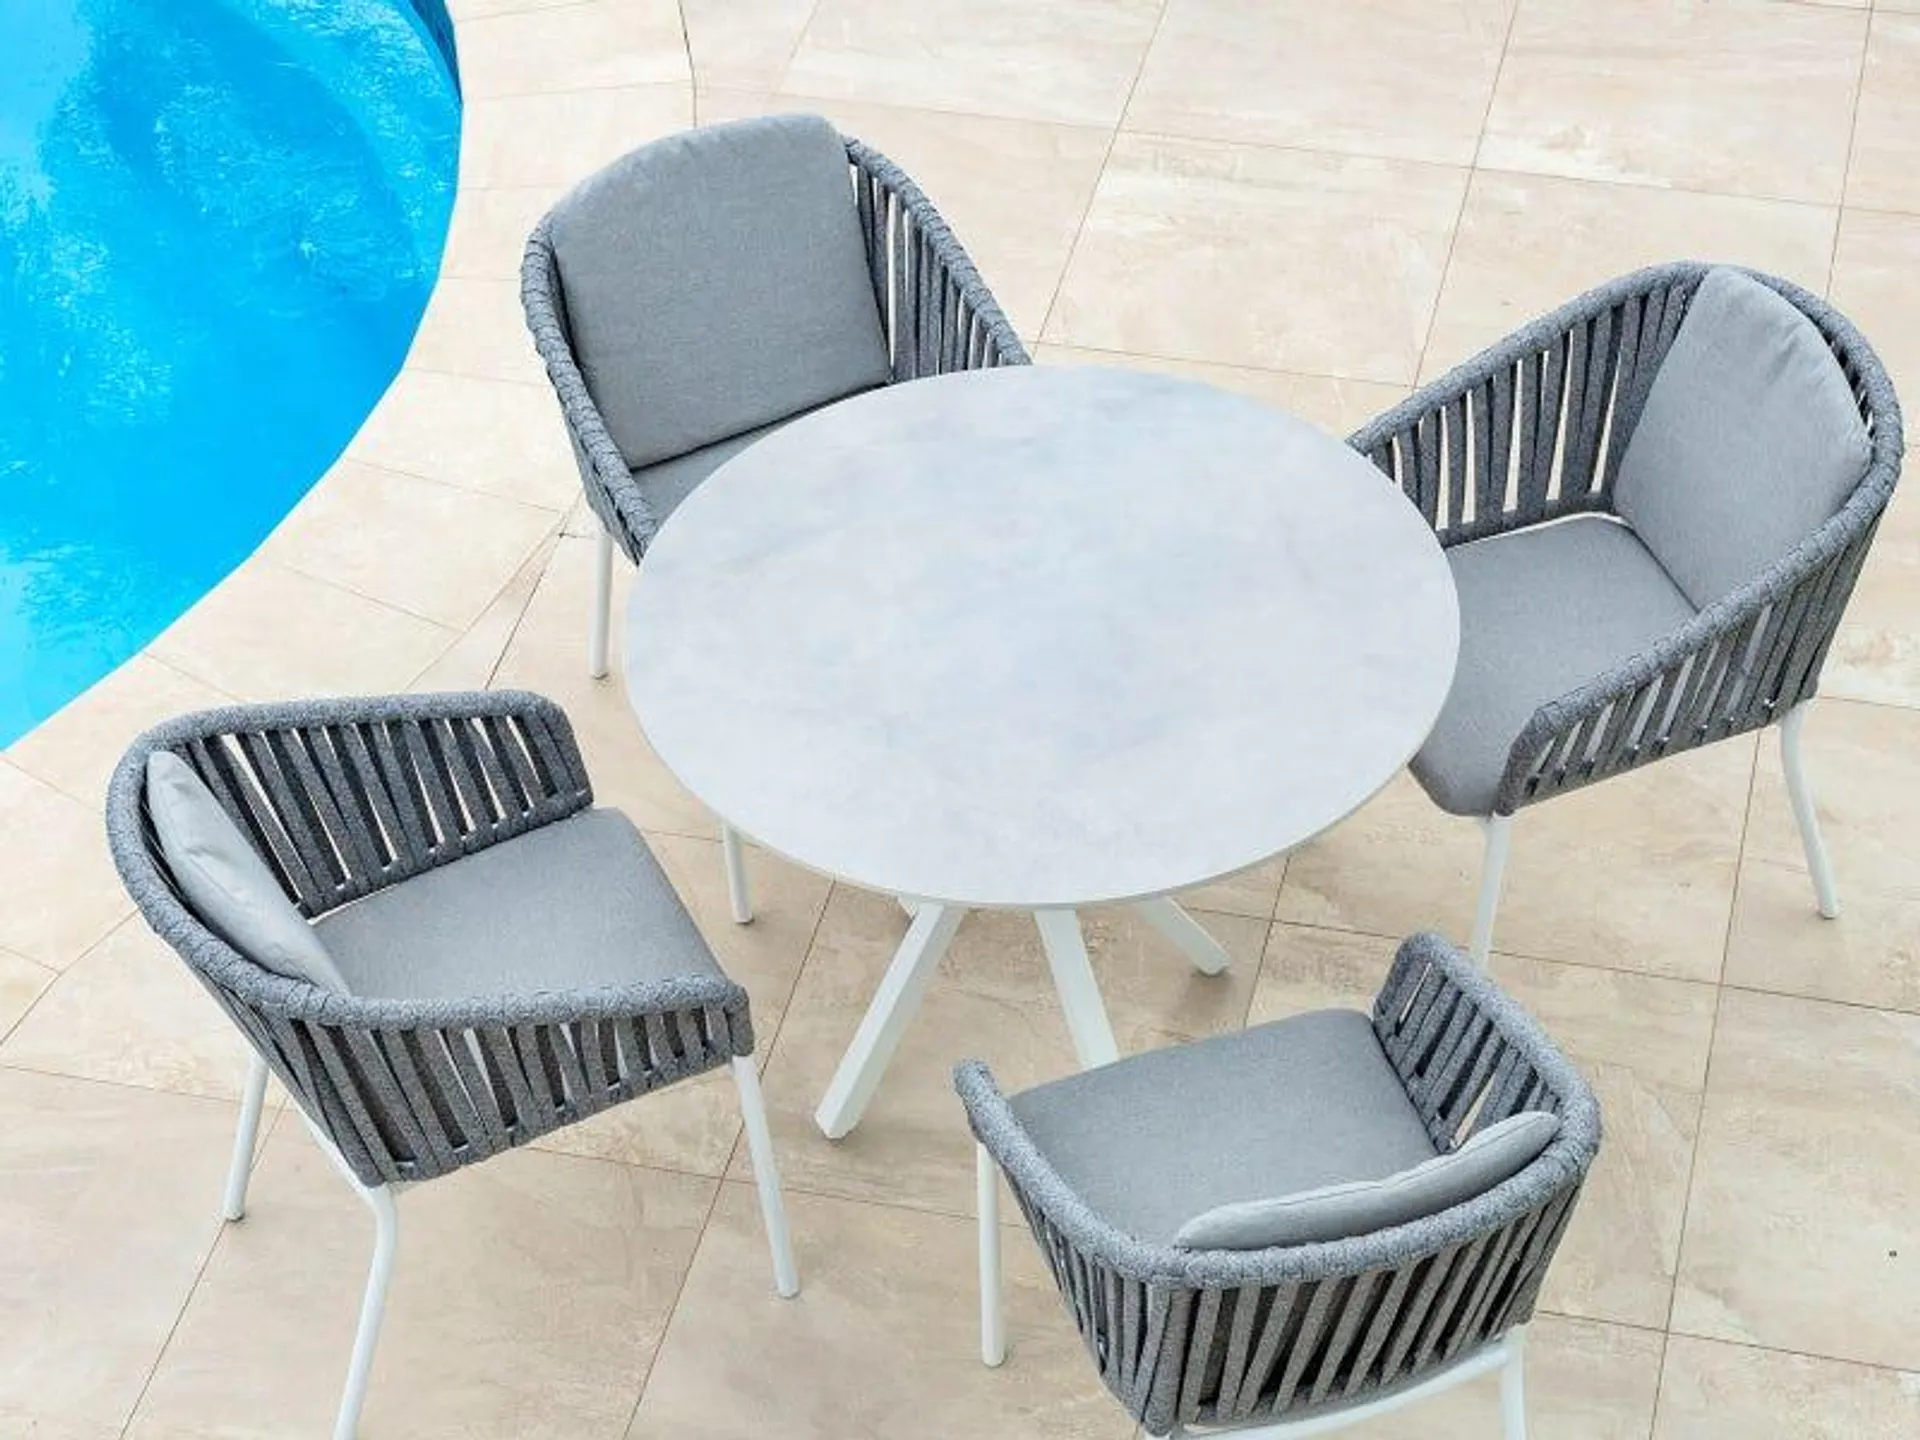 Adele Round Ceramic Table with Melang Chairs 5pc Outdoor Dining Setting